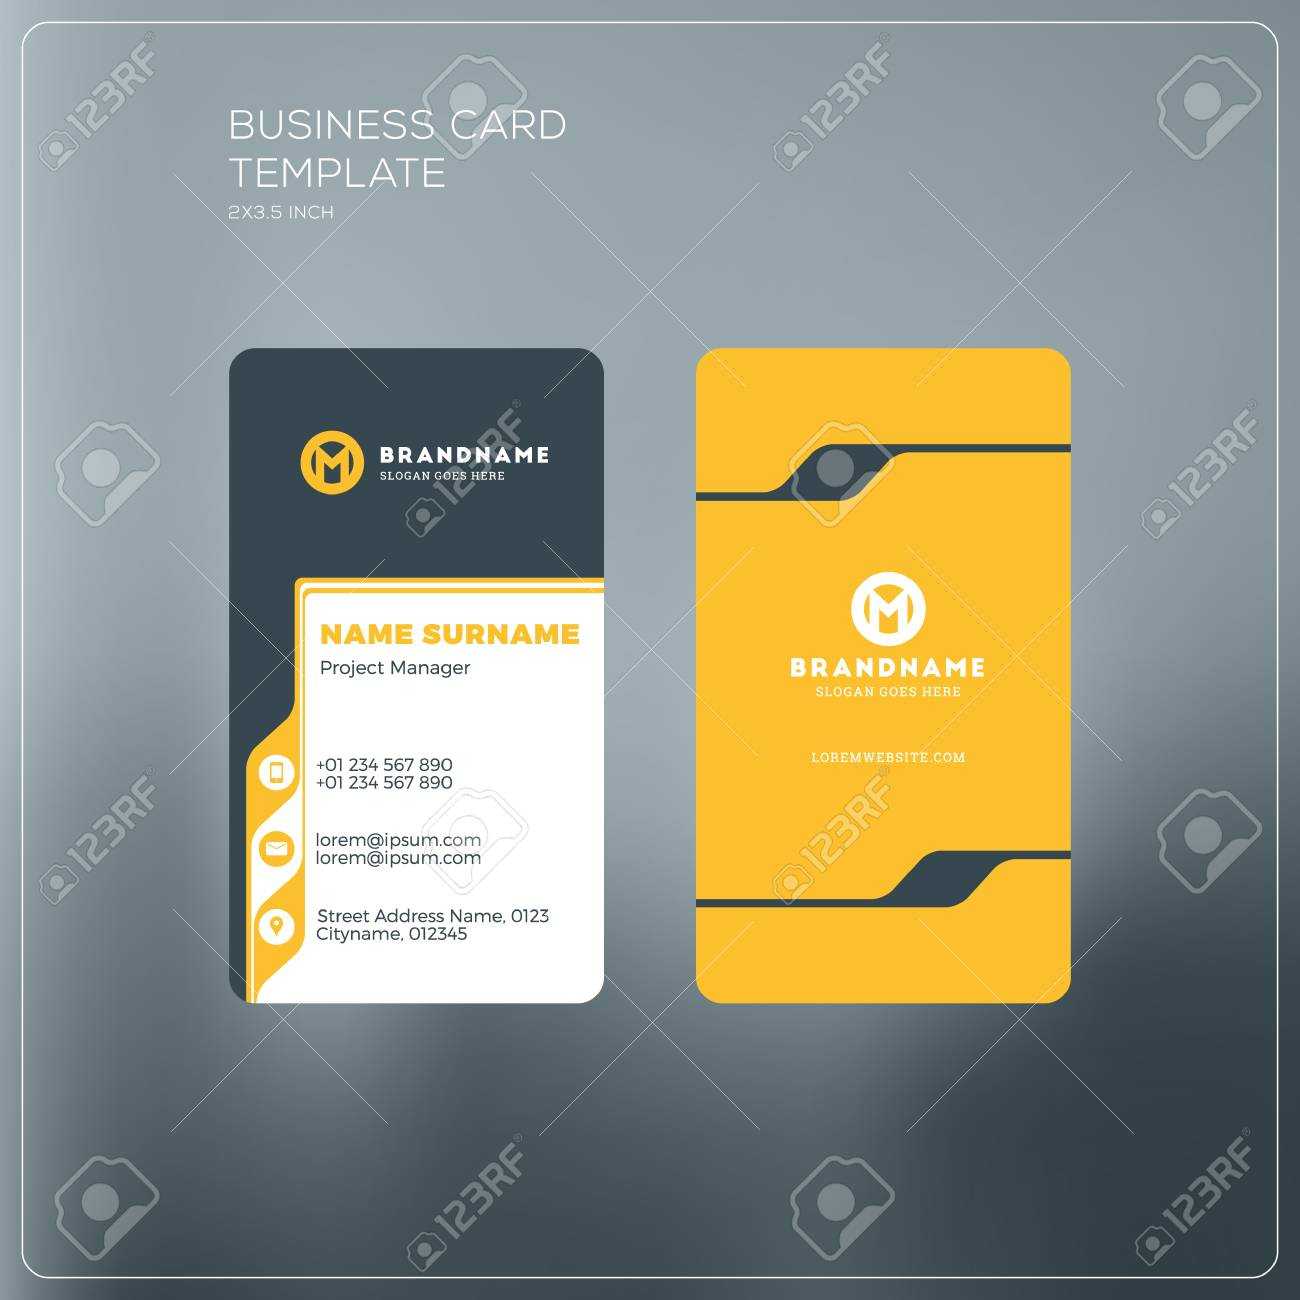 Personal Business Cards Template Pertaining To Business Cards For Teachers Templates Free